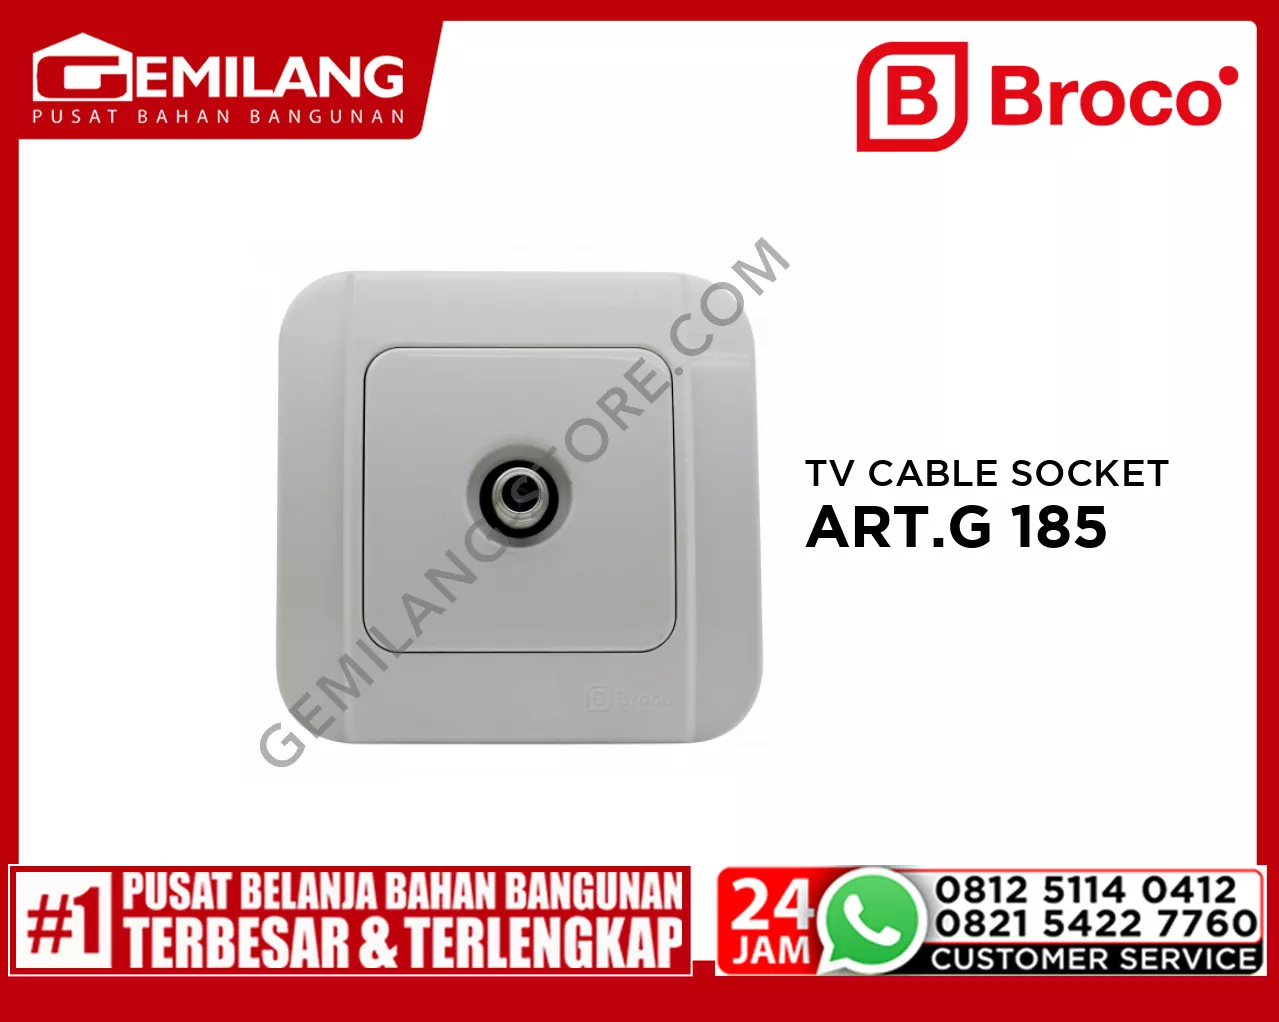 BROCO TV CABLE SOCKET F TYPE ART.G 185 SNW WHT